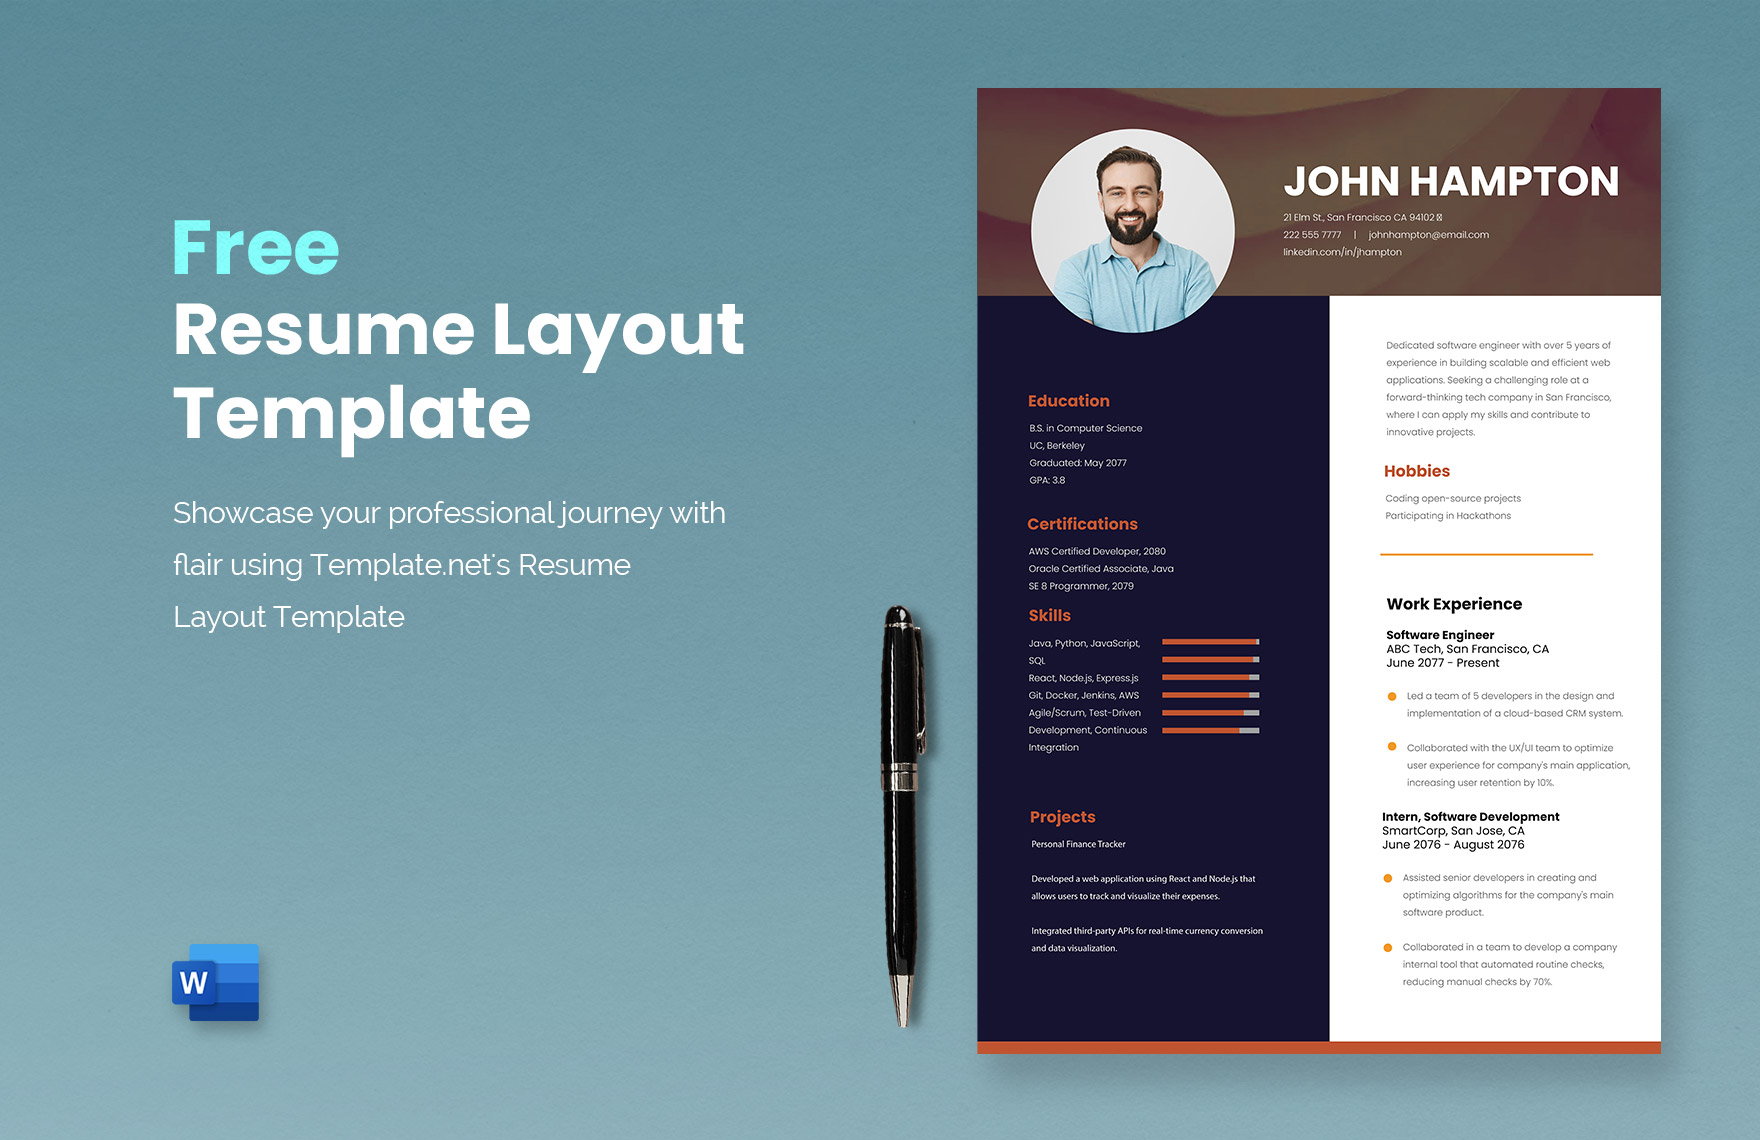 Free Resume Layout Template in Word